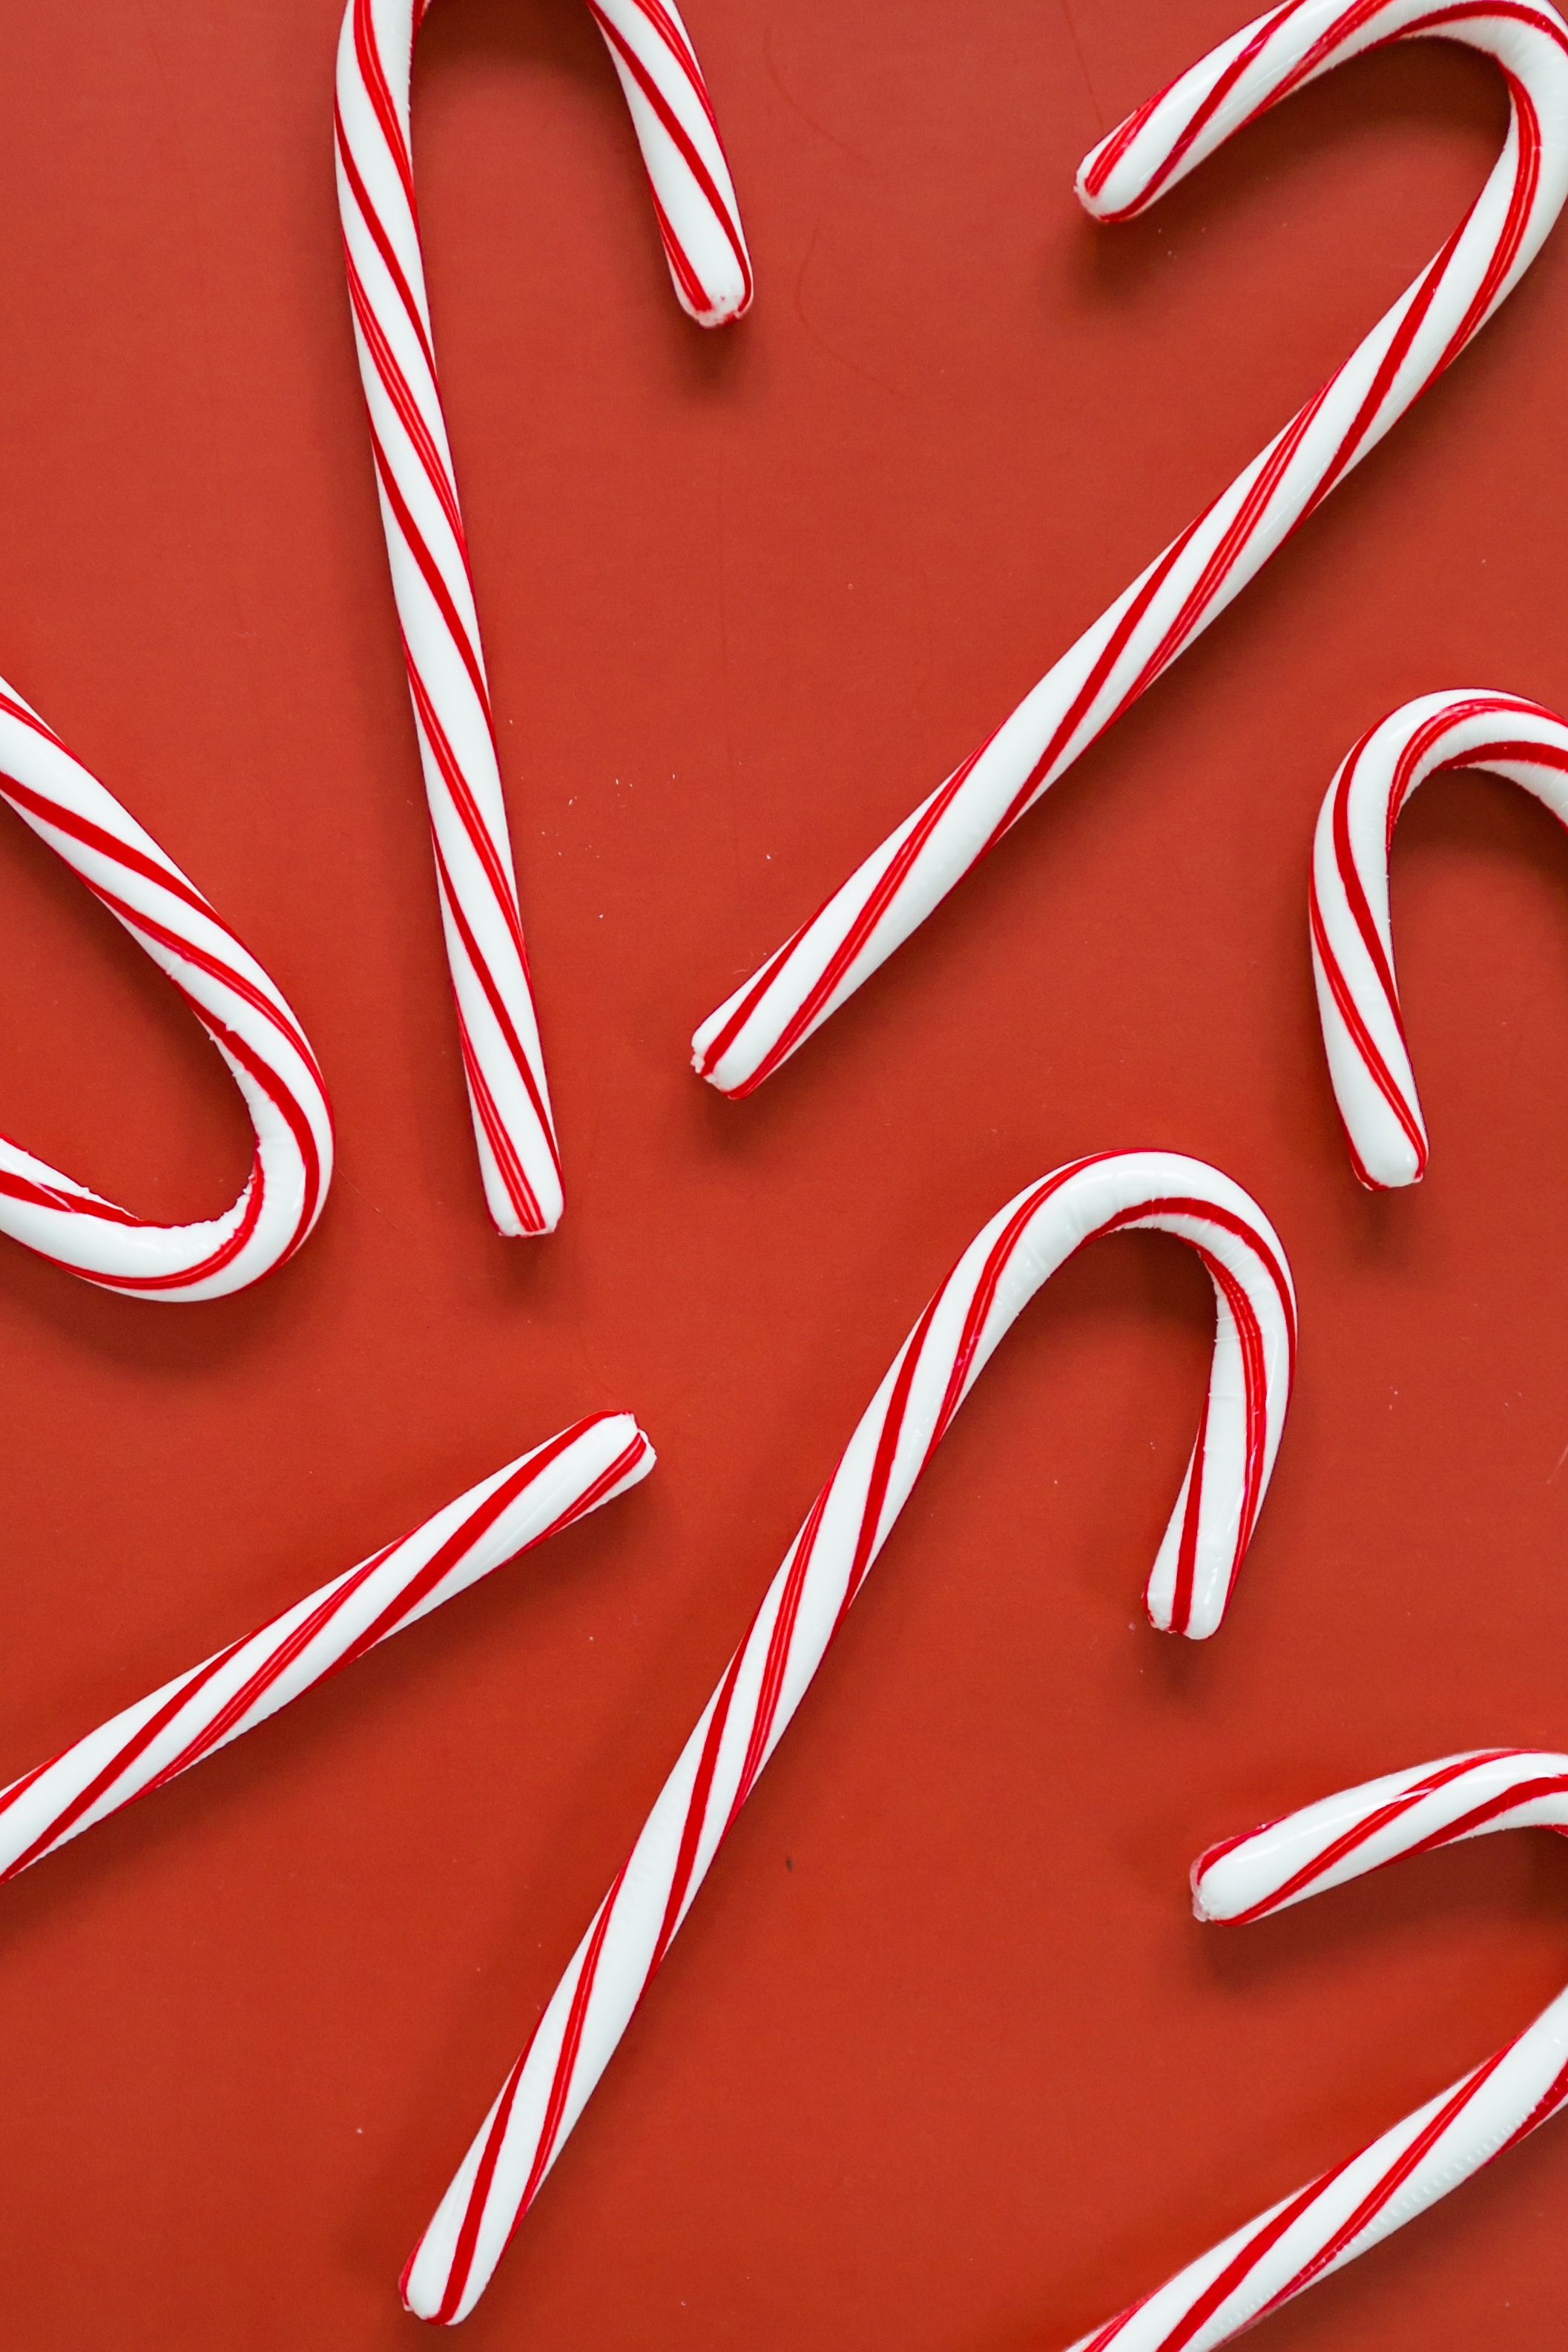 1080p pic candy canes, holidays, new year, christmas